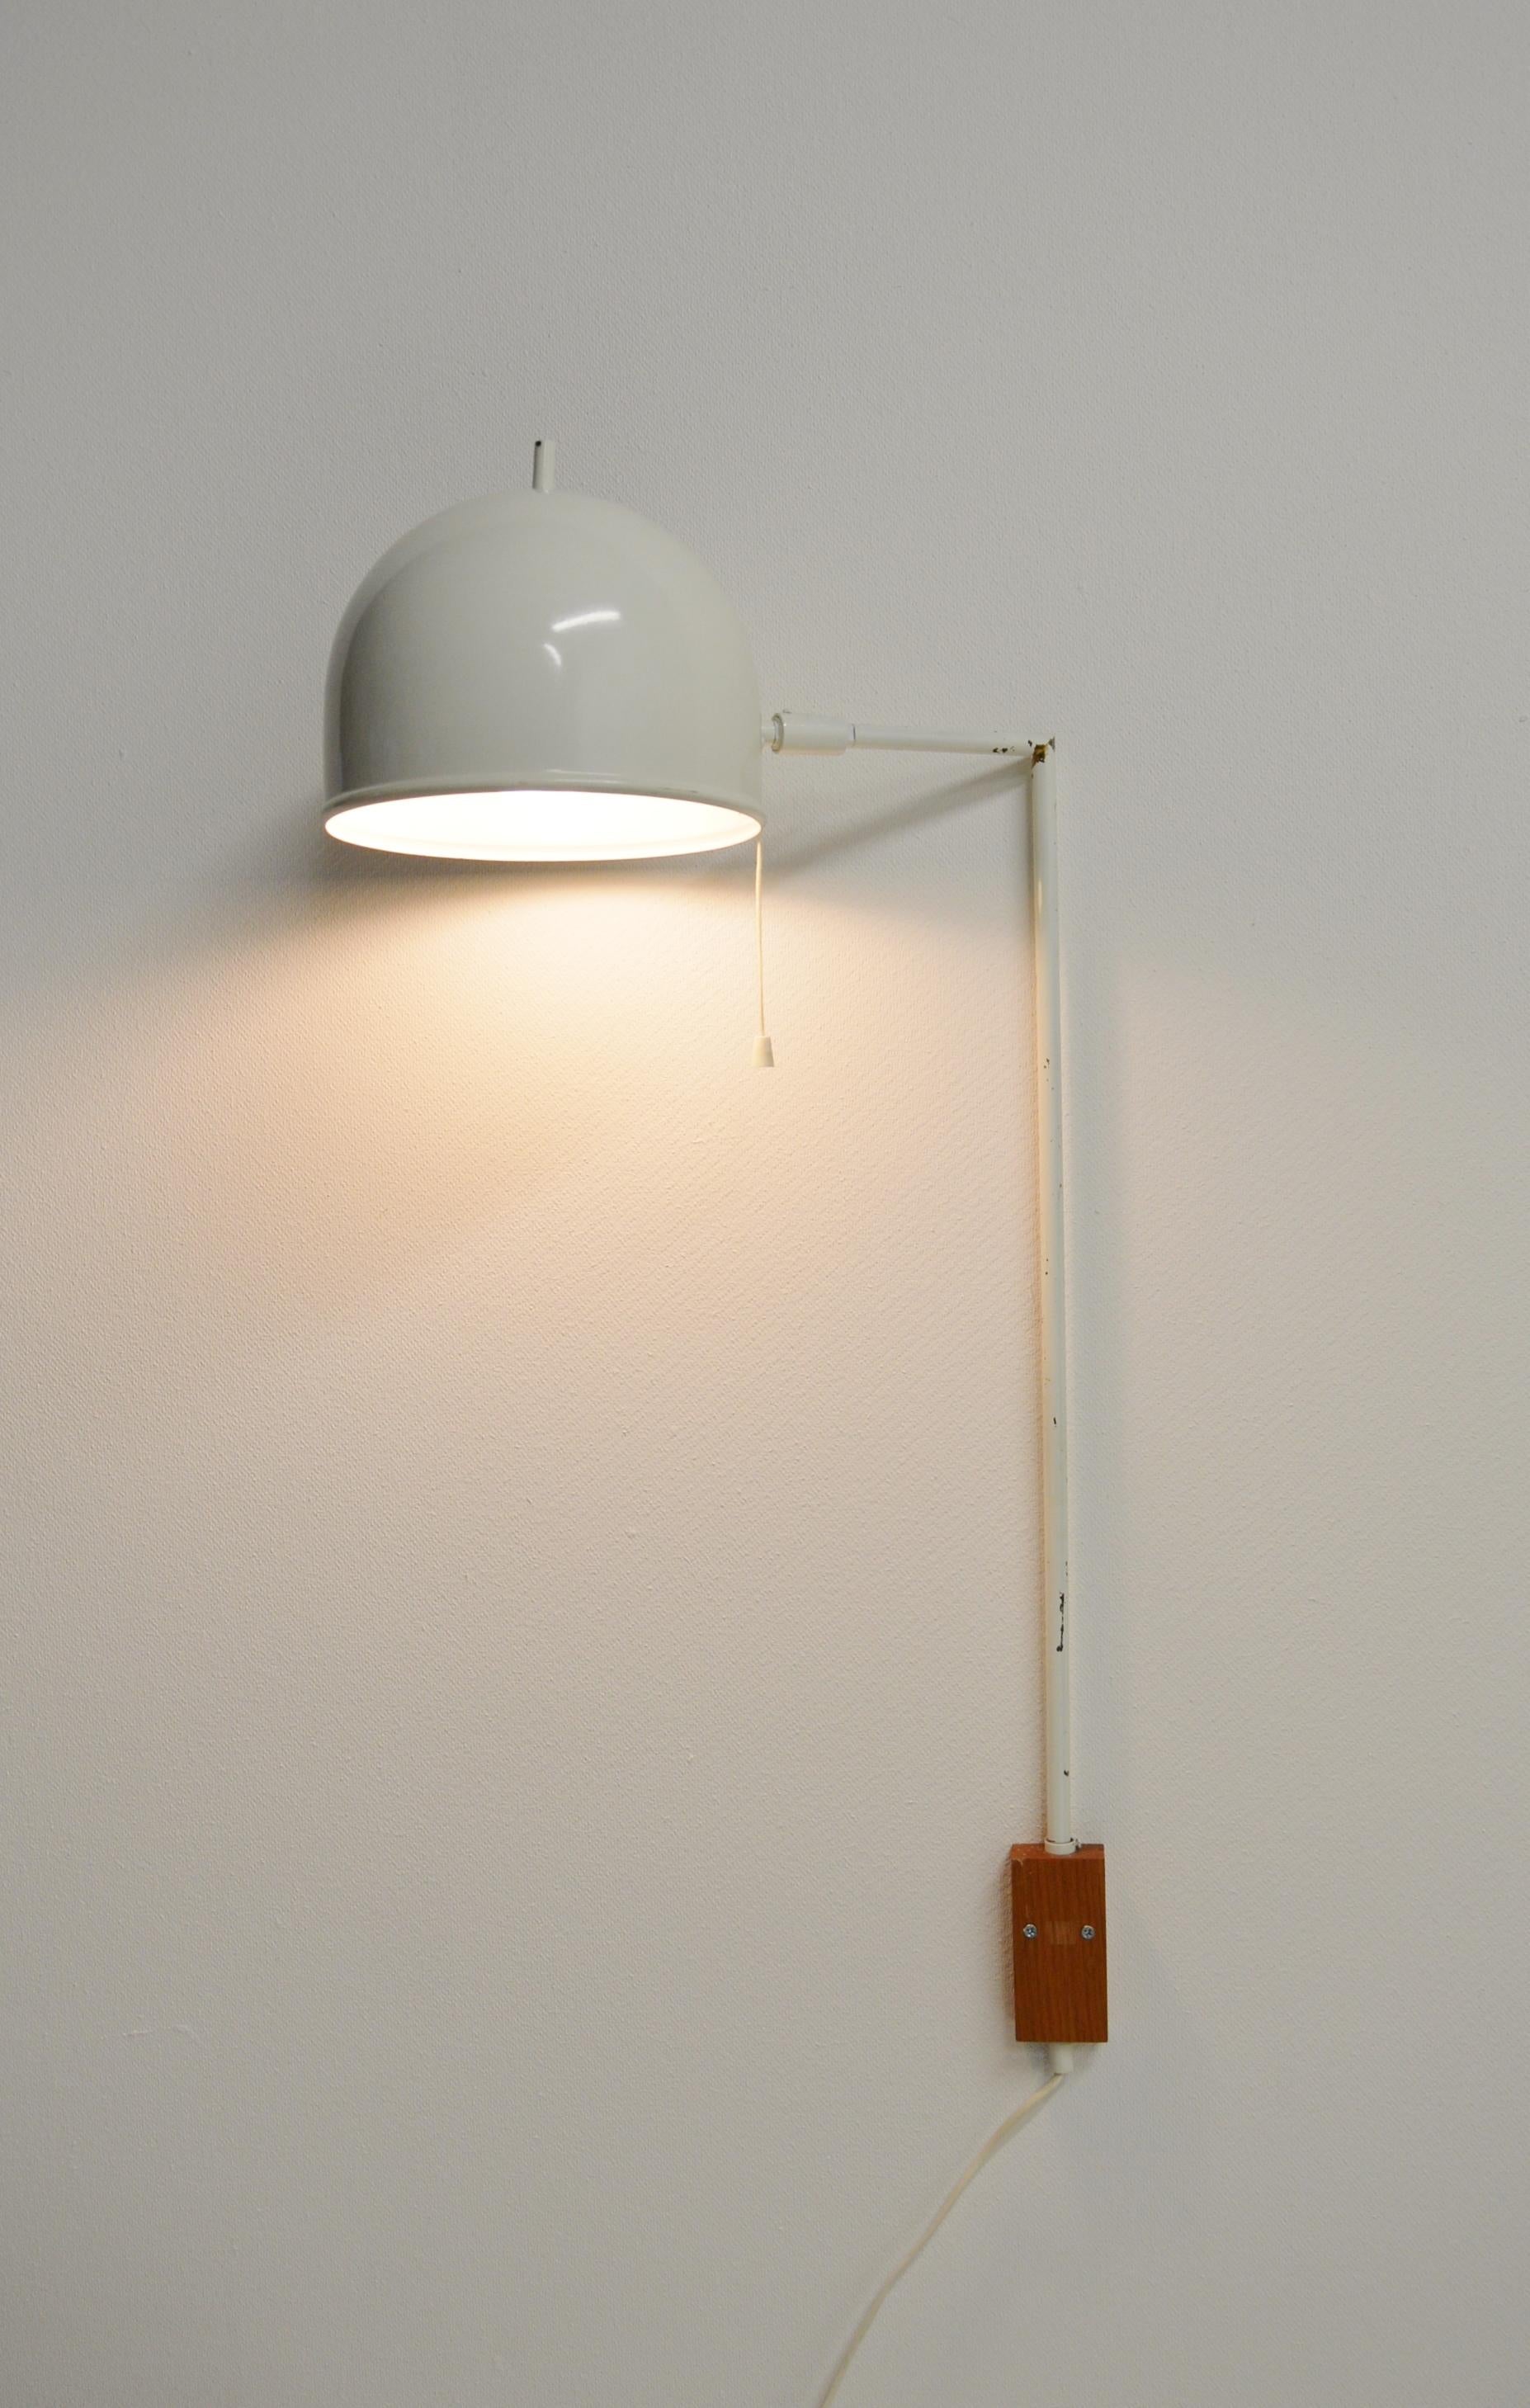 - Wall light designed and produced by Bergboms.
- This model should be screwed into the wall, a shelf, or an equivalent place
- Provides a pleasant work light
- Can be adjusted laterally by turning
- White lacquered metal.